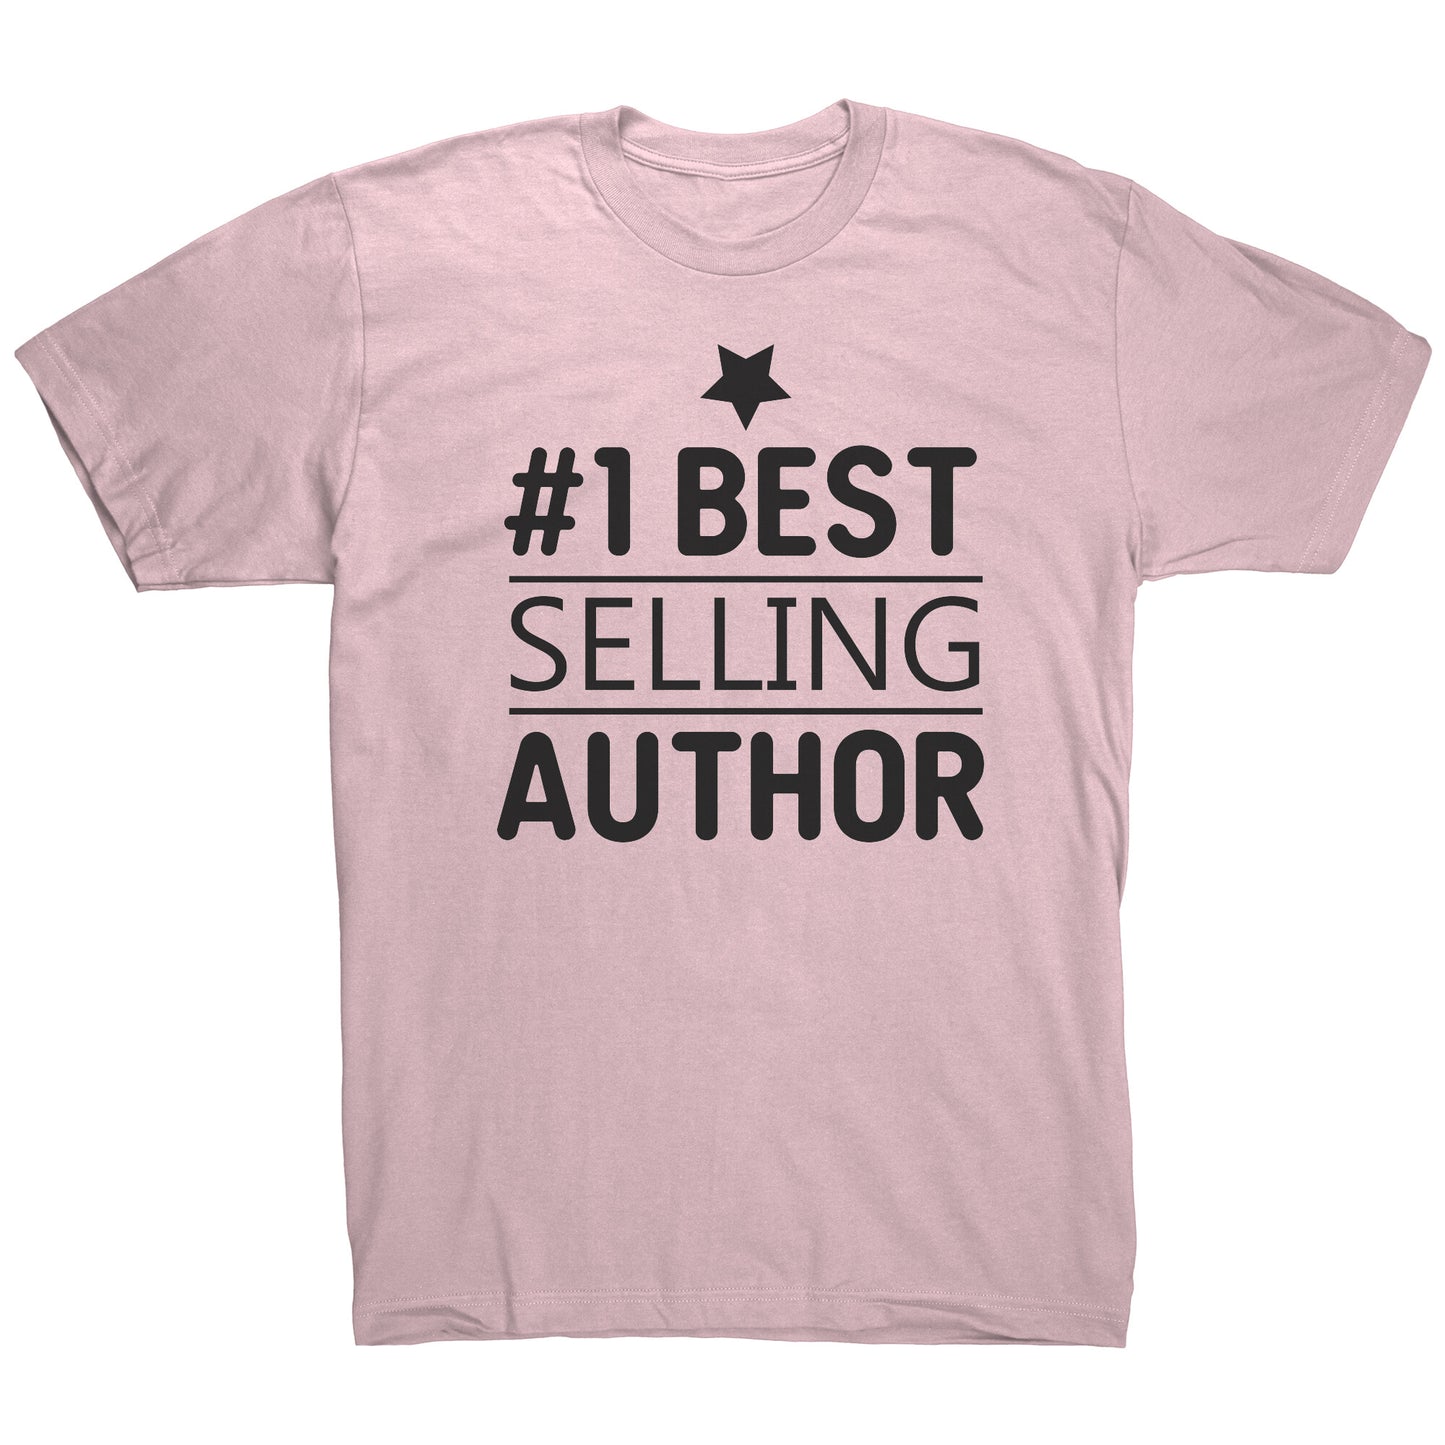 #1 Best Selling Author with a Star